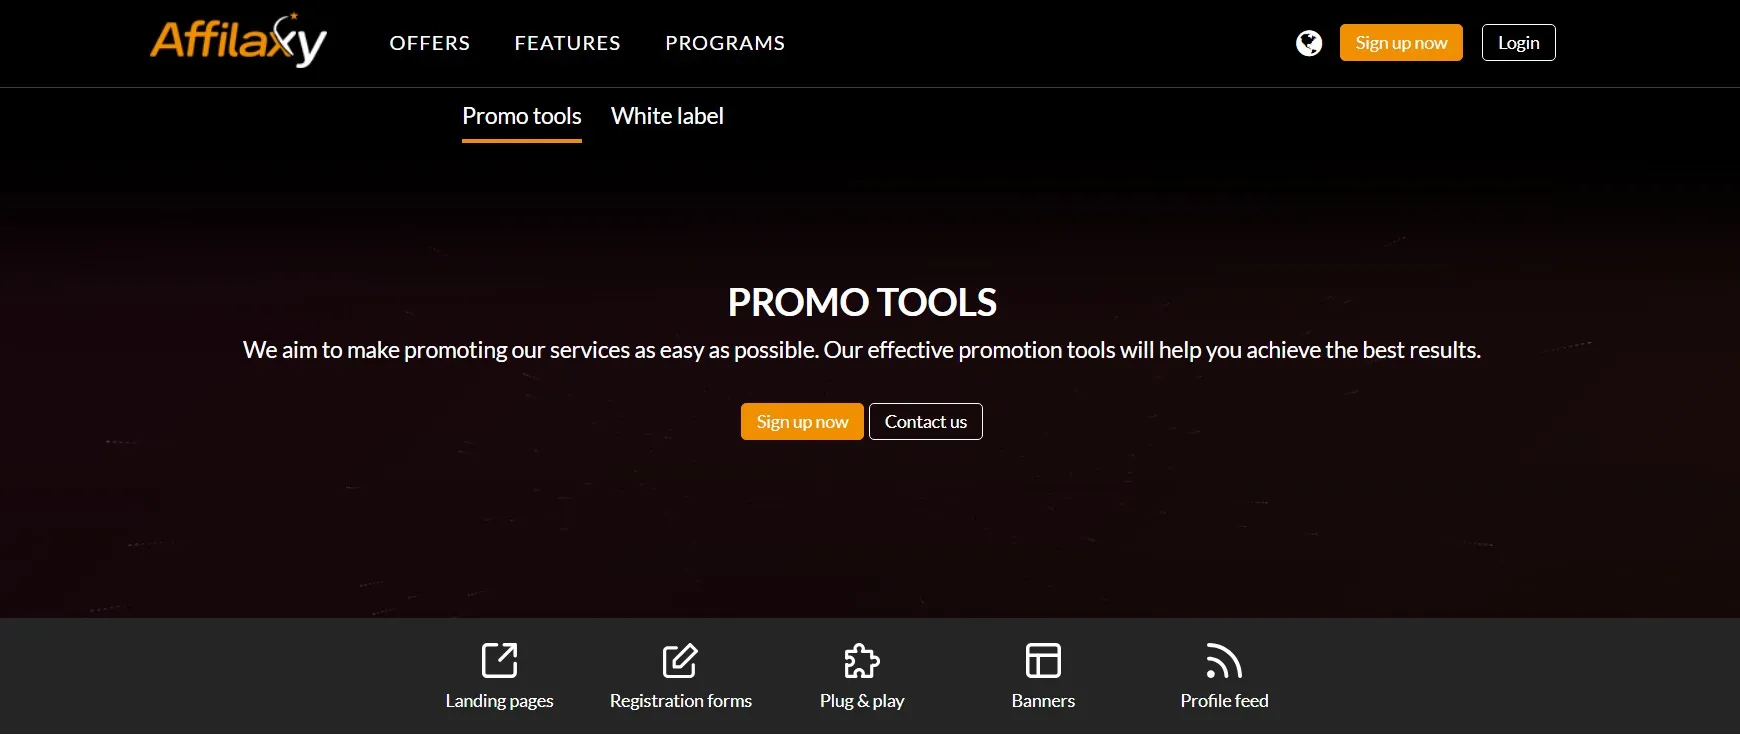 Promo Tools Offered by Affilaxy